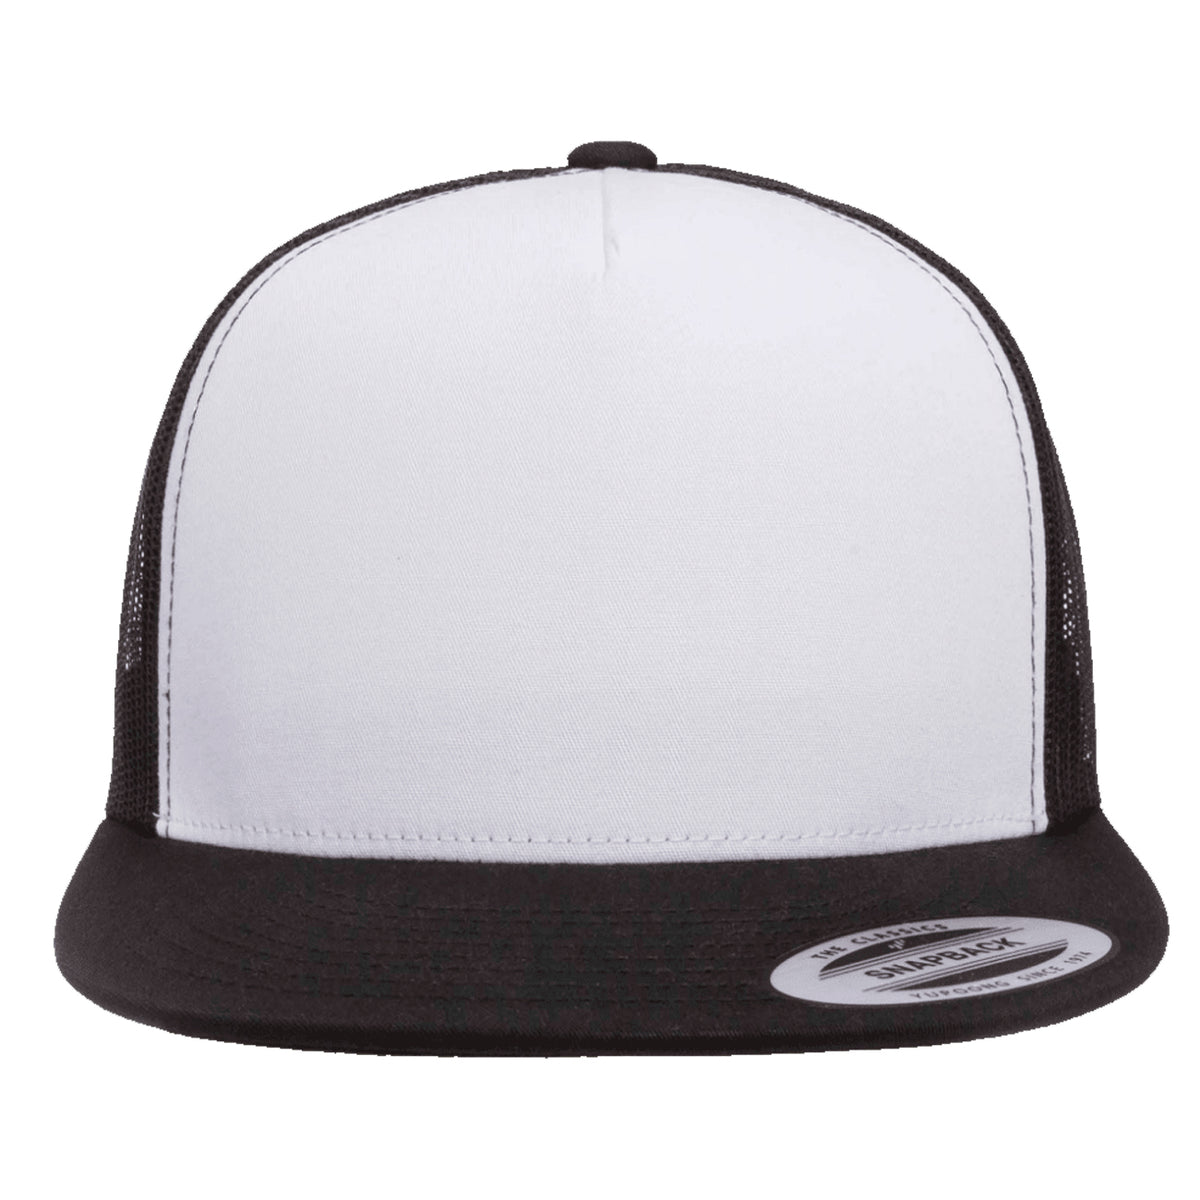 Flexfit Yupoong Adjustable Cap White Trucker Classic – Panel Front 2040USA